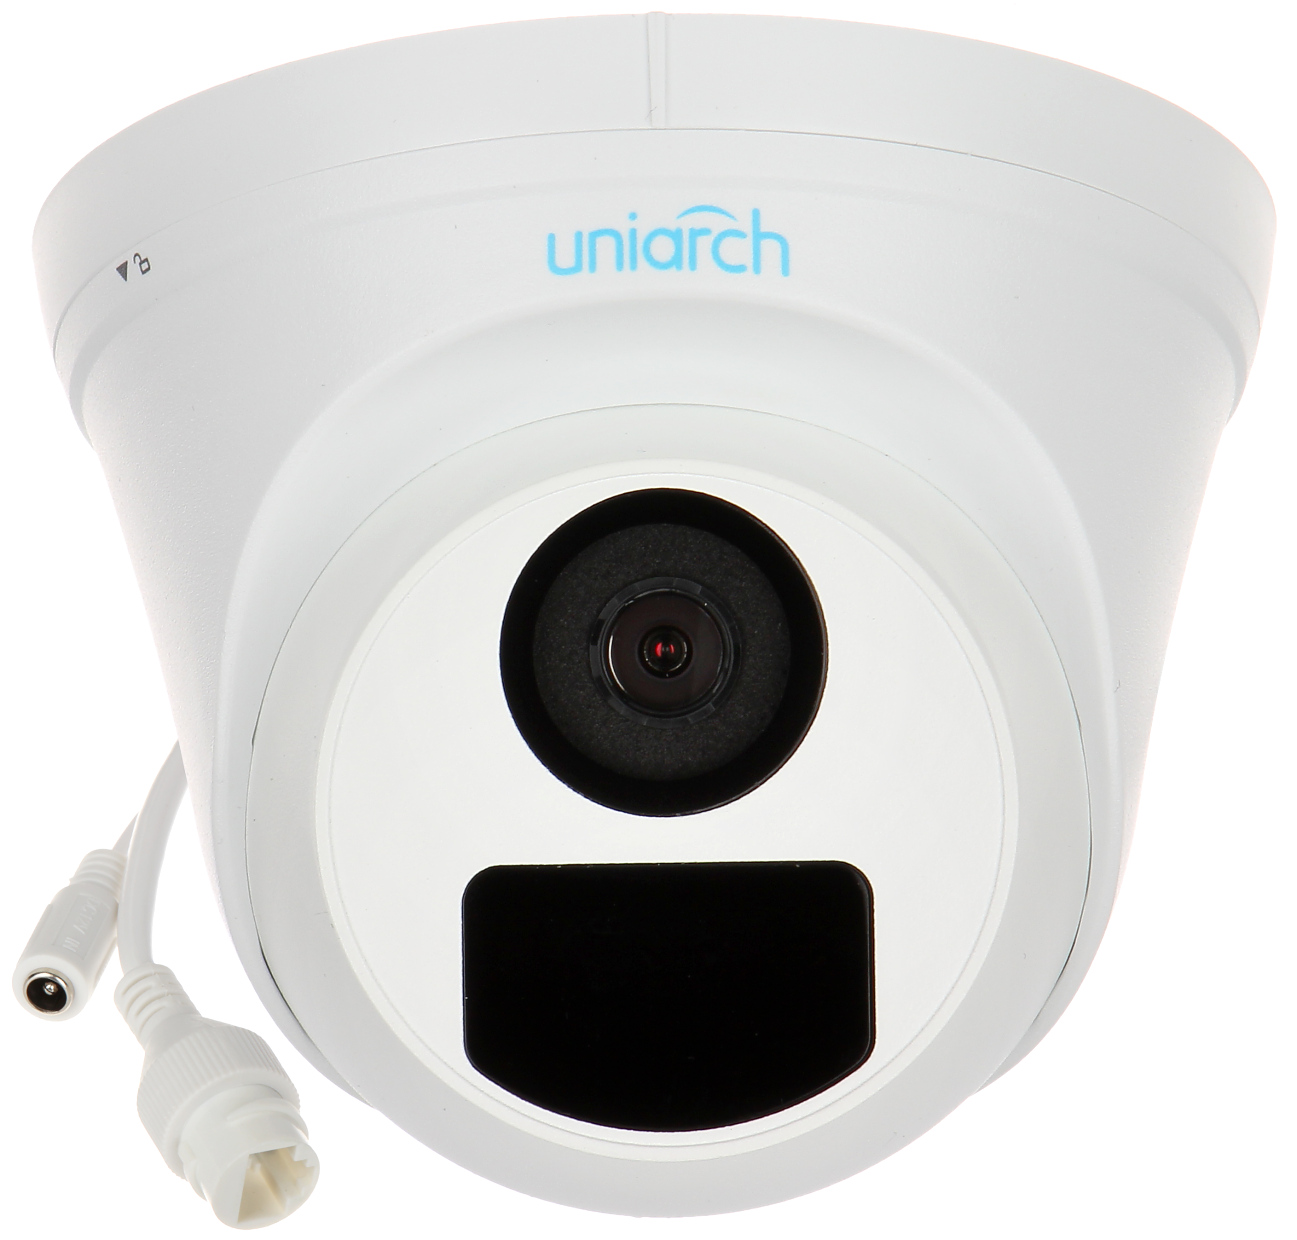 IP CAMERA IPC-T114-PF28 - 3.7 Mpx 2.8 mm UNIARCH - Dome Cameras with  Fixed-Focal Lens and Infra-Red Illum... - Delta